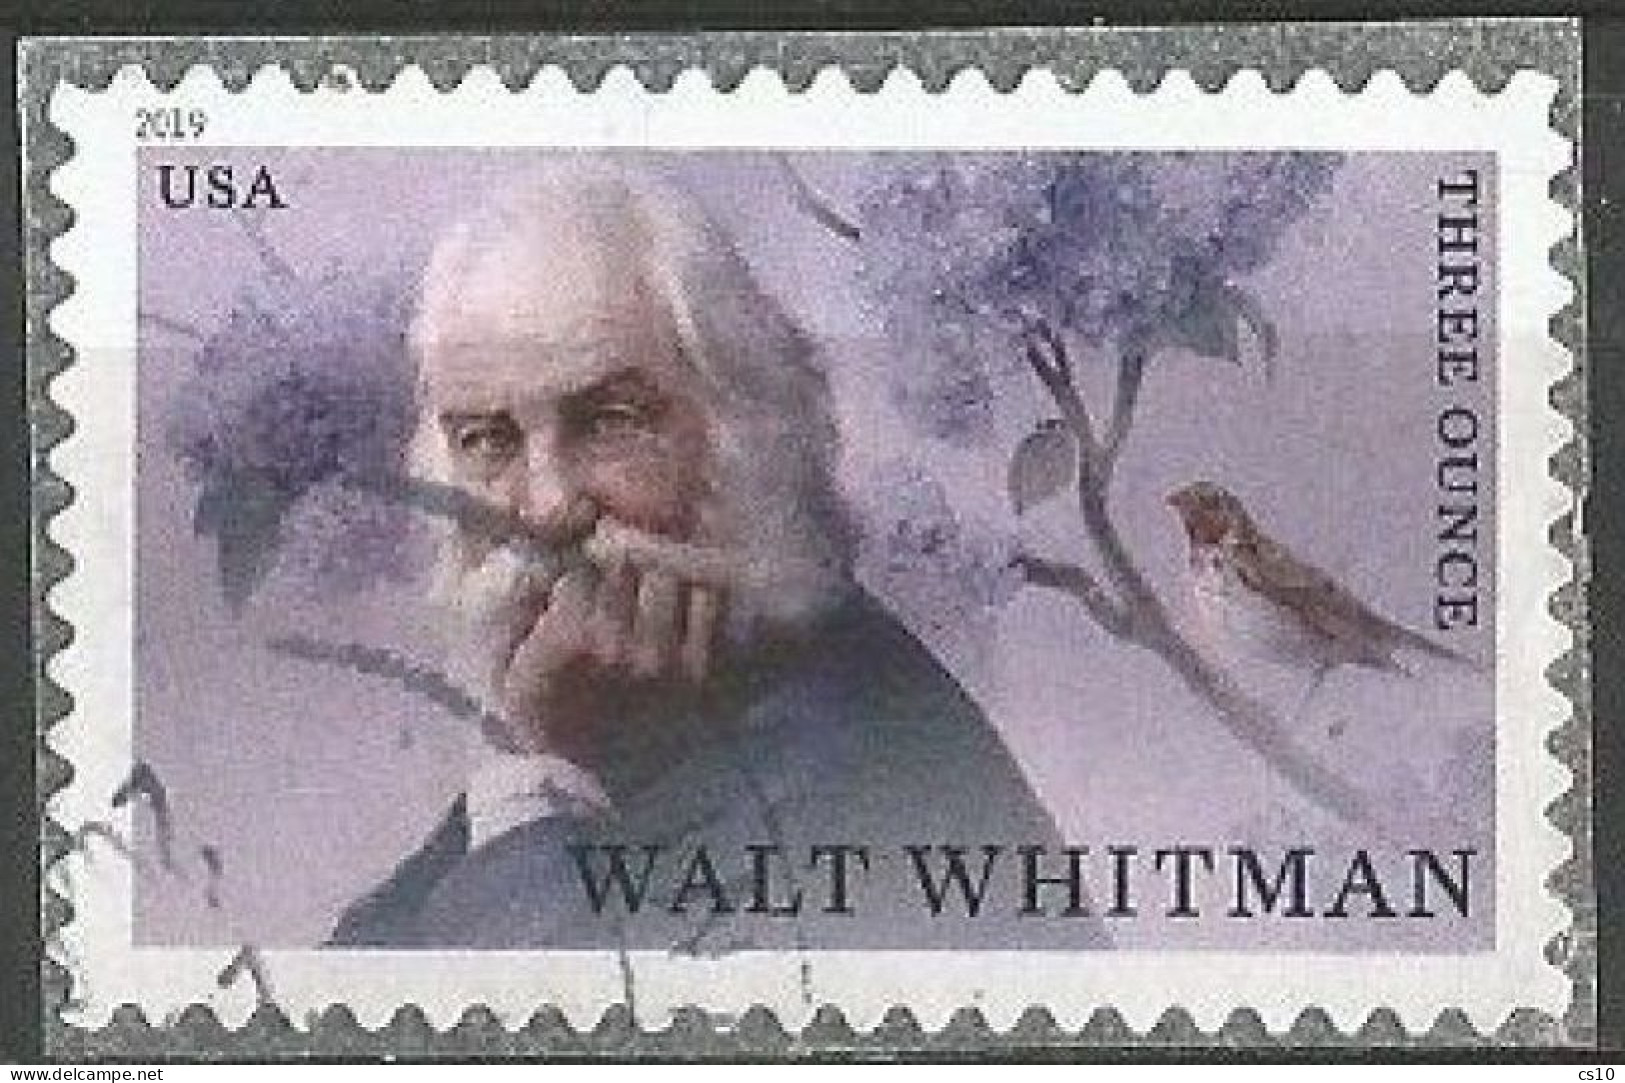 USA 2019 Walt Whitman 3 Ounce - SC.# 5414 - VFU Condition Round PMK - Used Stamps